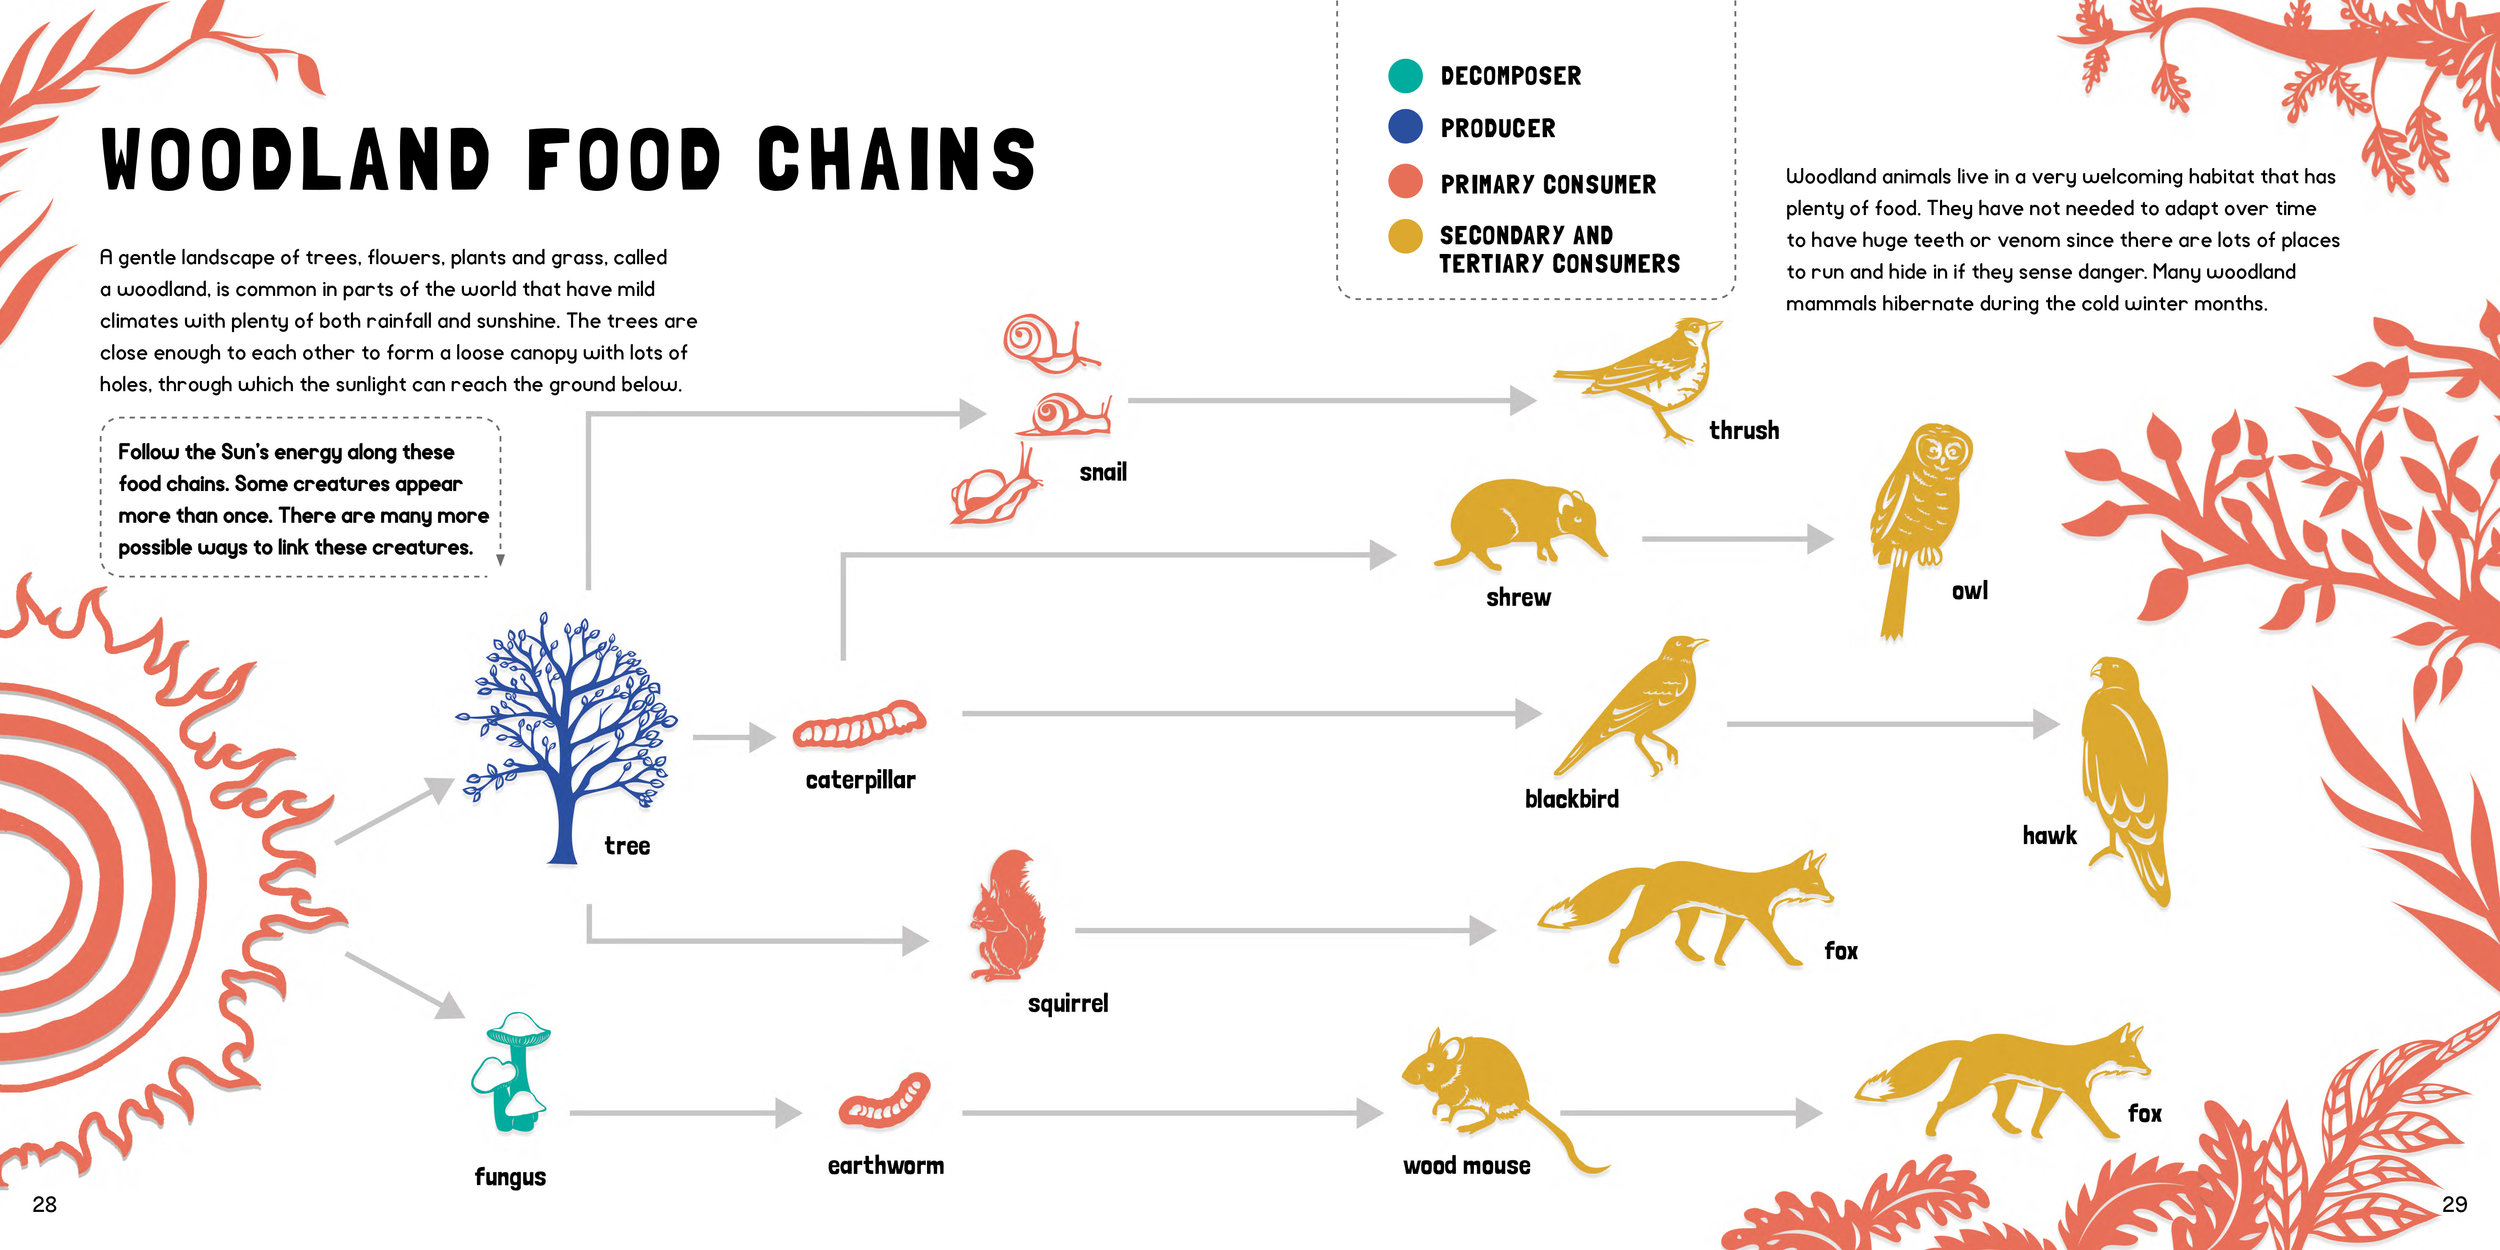 FOOD CHAINS for rights-15.jpg